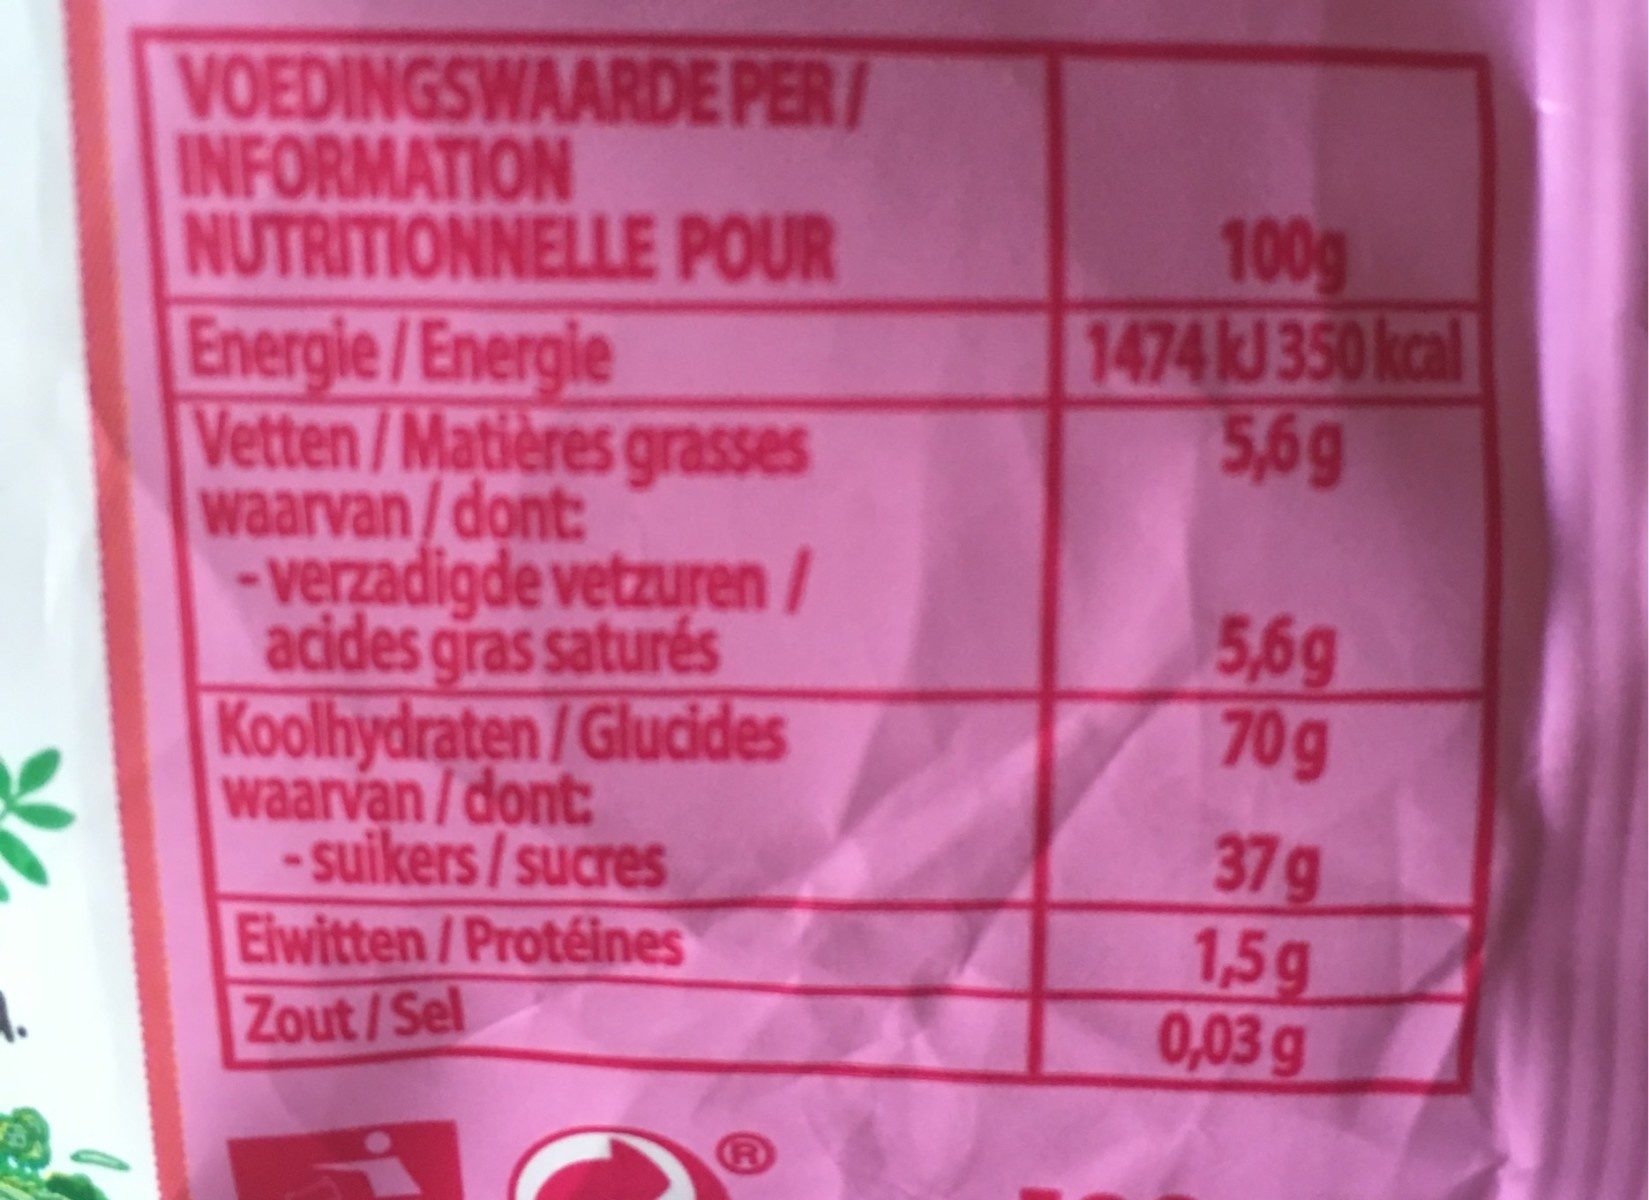 Fruit-tella Strawberry - Nutrition facts - fr